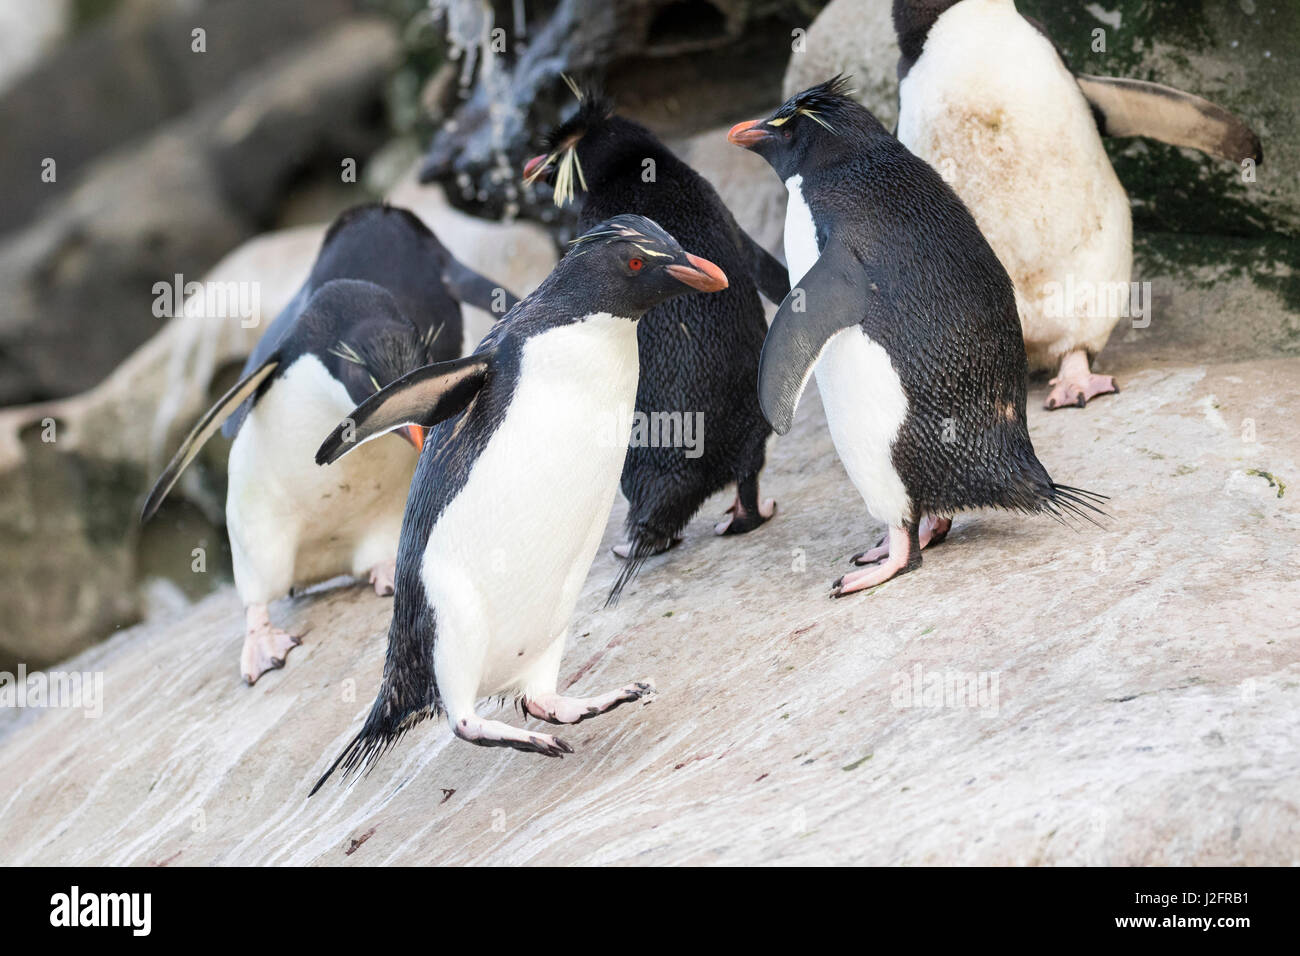 Penguins climbing up a steep cliff to their rookery. Rockhopper penguin (Eudyptes chrysocome), subspecies southern rockhopper penguin. Stock Photo